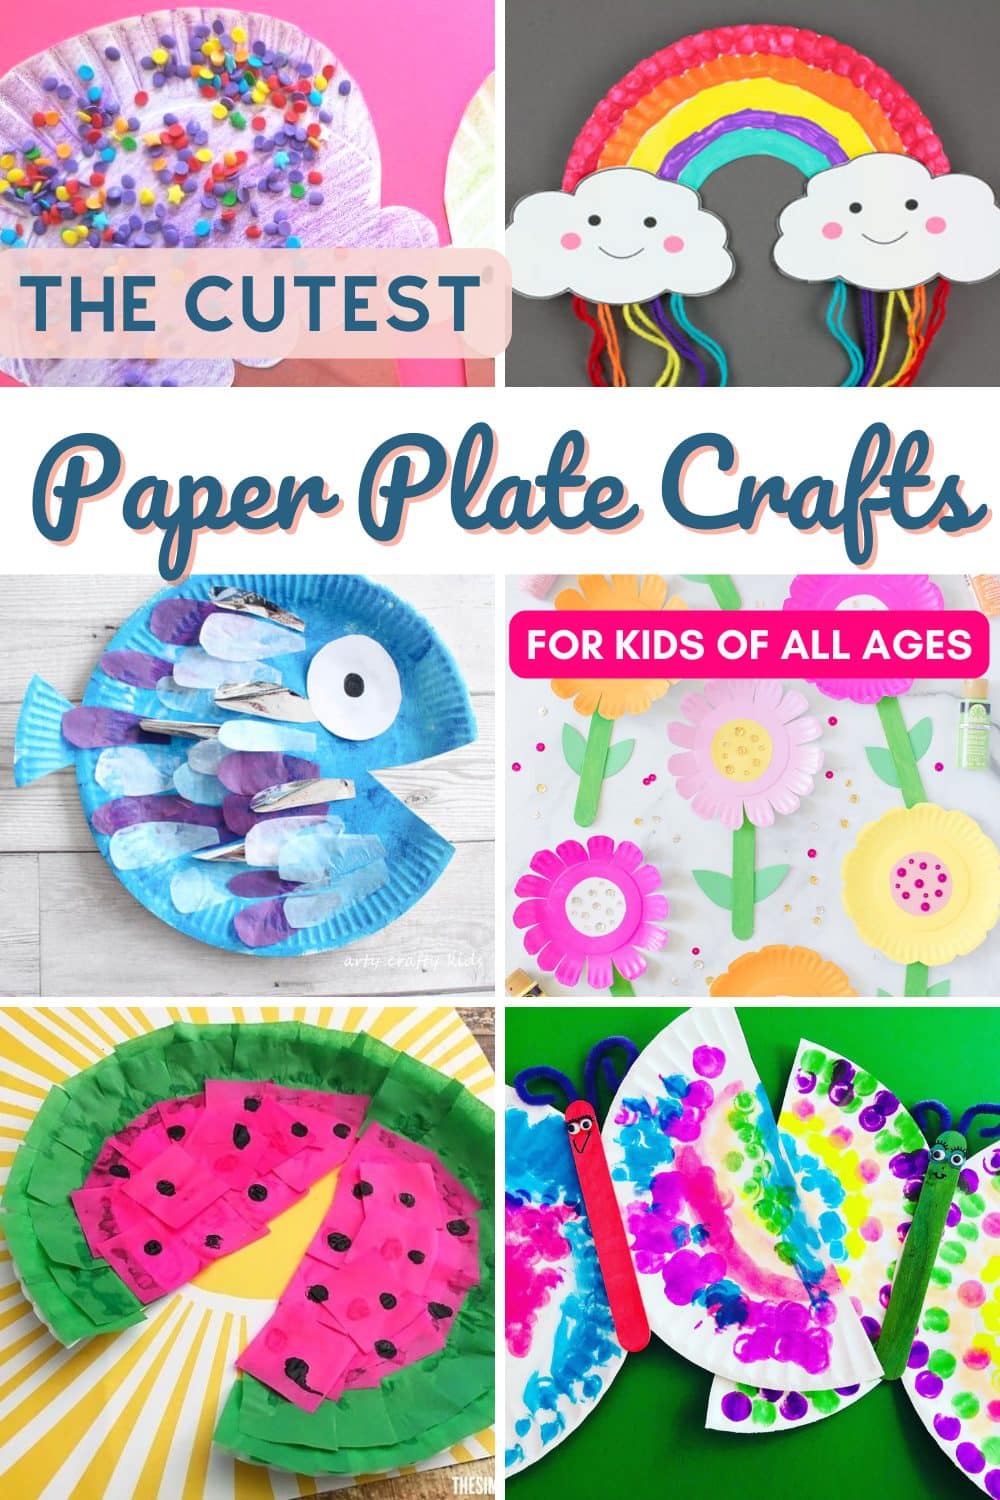 Collage photo of kids crafts using paper plates